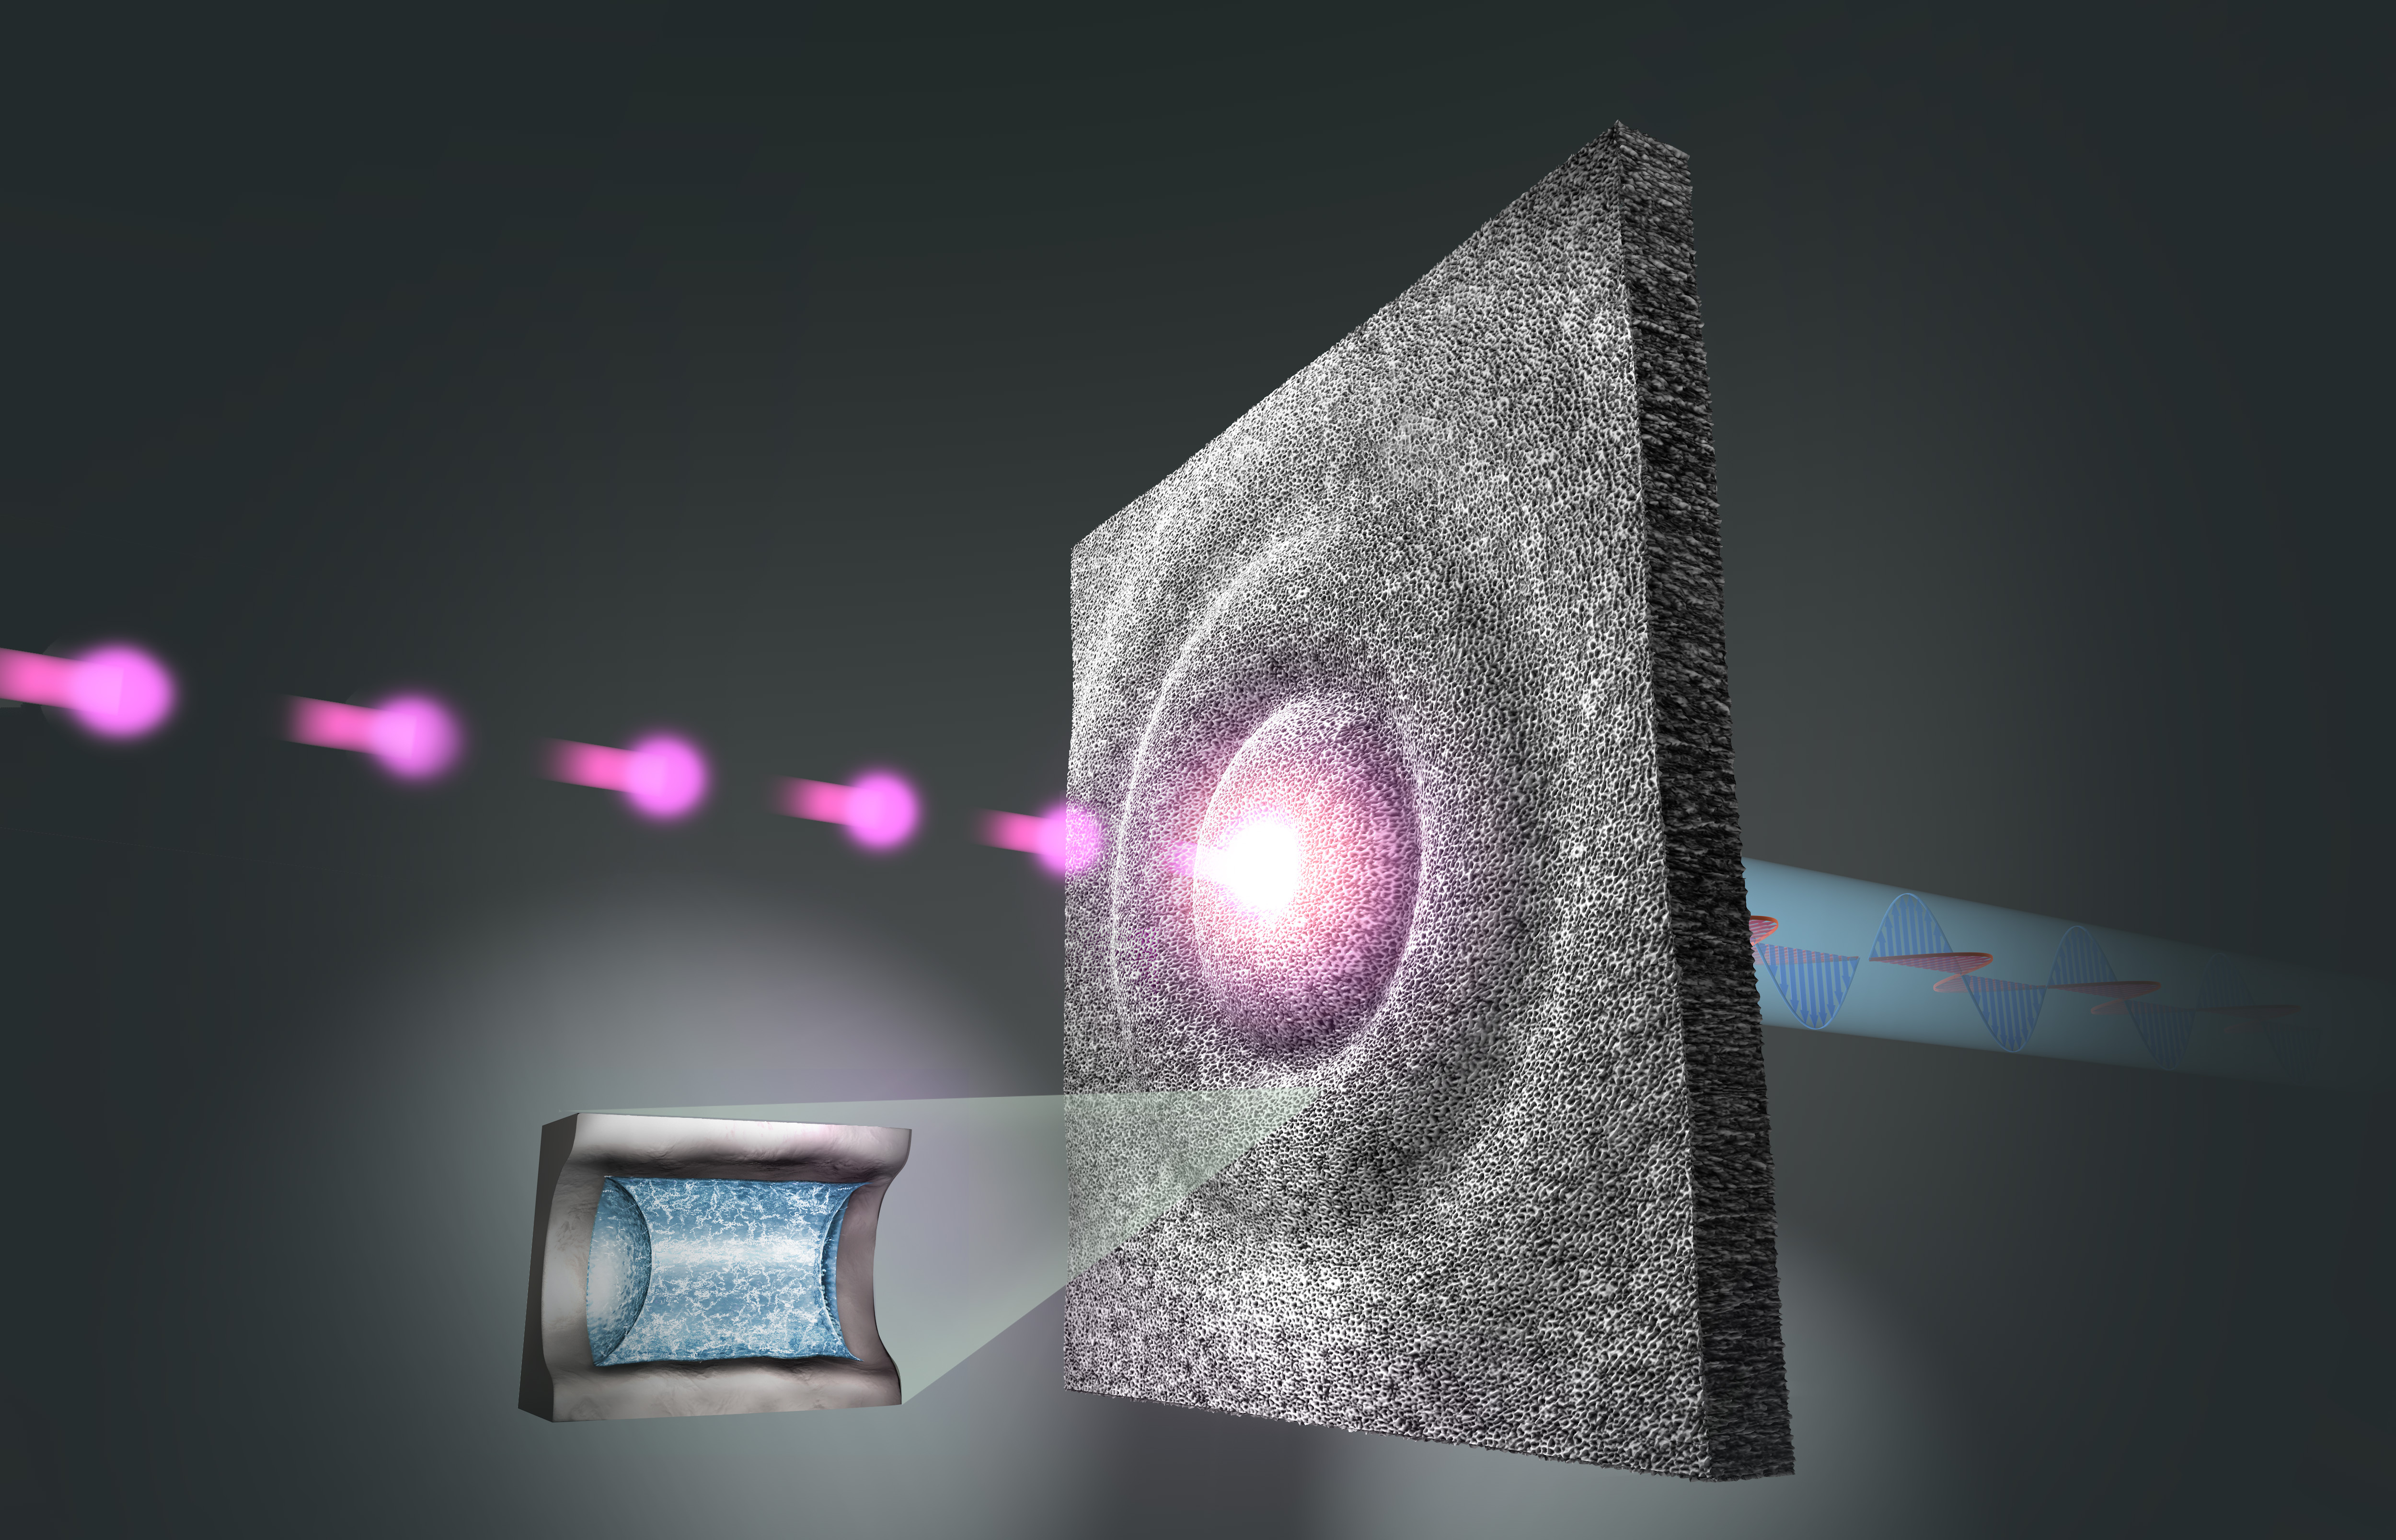 Similar to droplets hitting a water surface, short laser pulses lasting only a fraction of a billionth of a second excite a nanoporous silicon membrane to vibrate in the ultrasound range